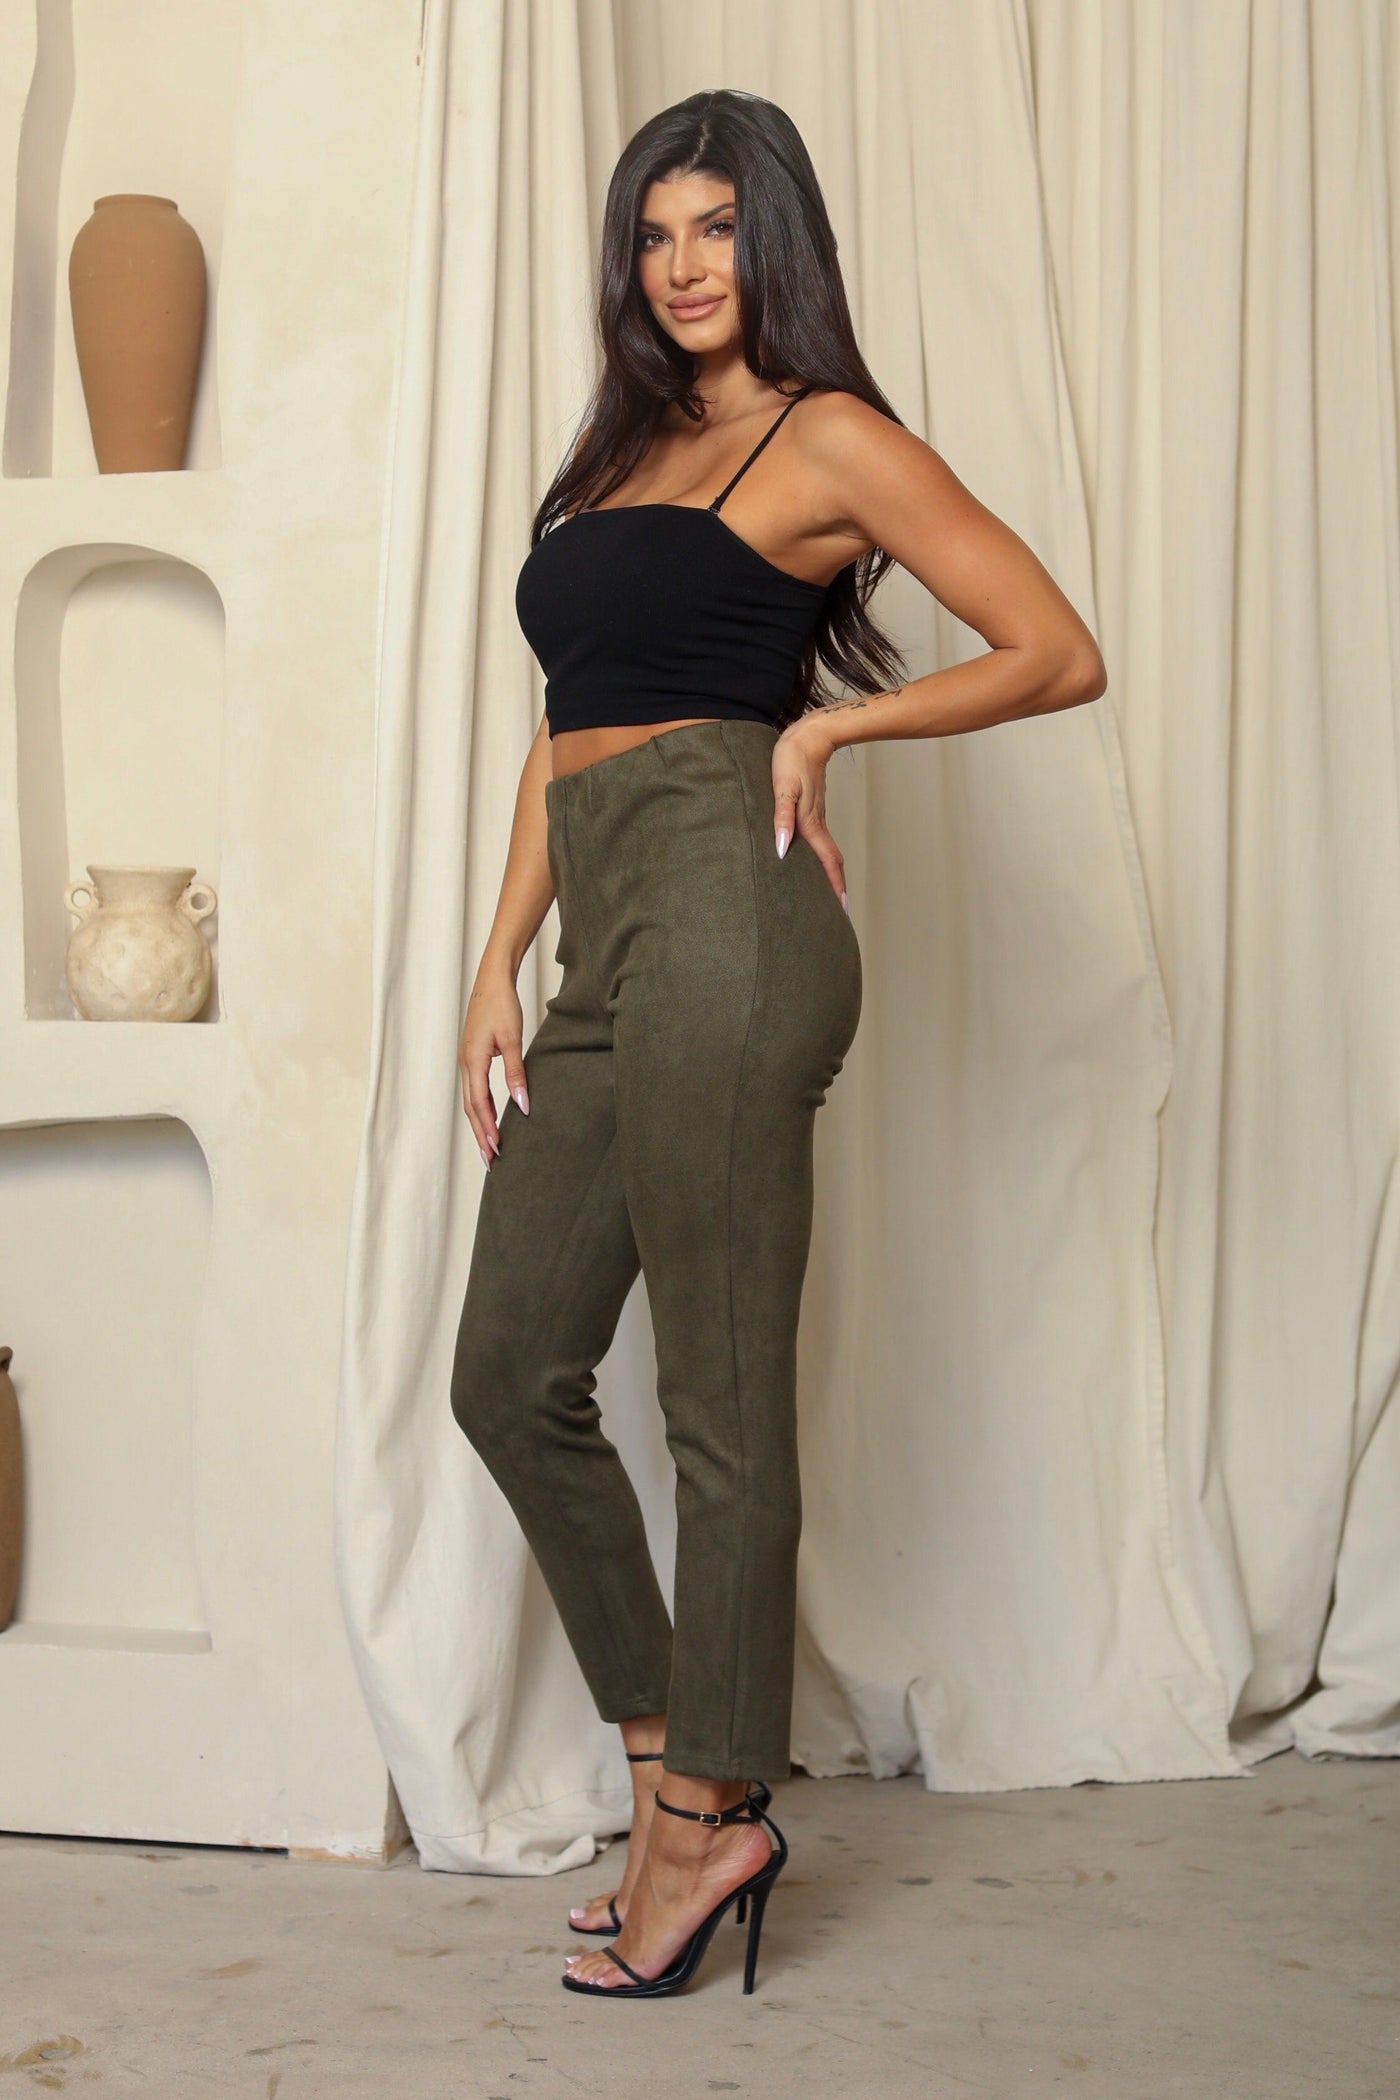 TERRA FAUX SUEDE LEGGINGS (PLUS AVAILABLE) , PANTS , It's NOMB , ARMY GREEN, DARK GREEN, DRESSY PANTS, FAUX SUEDE LEGGINGS, GENEVE LEGGINGS, GREEN, LEGGINGS, MOSS GREEN, OLIVE, PANTS, SUEDE LEGGINGS, SUEDE PANTS, SUEDE SLACKS, VEGAN SUEDE, WORK PANTS , It's NOMB , itsnomb.com